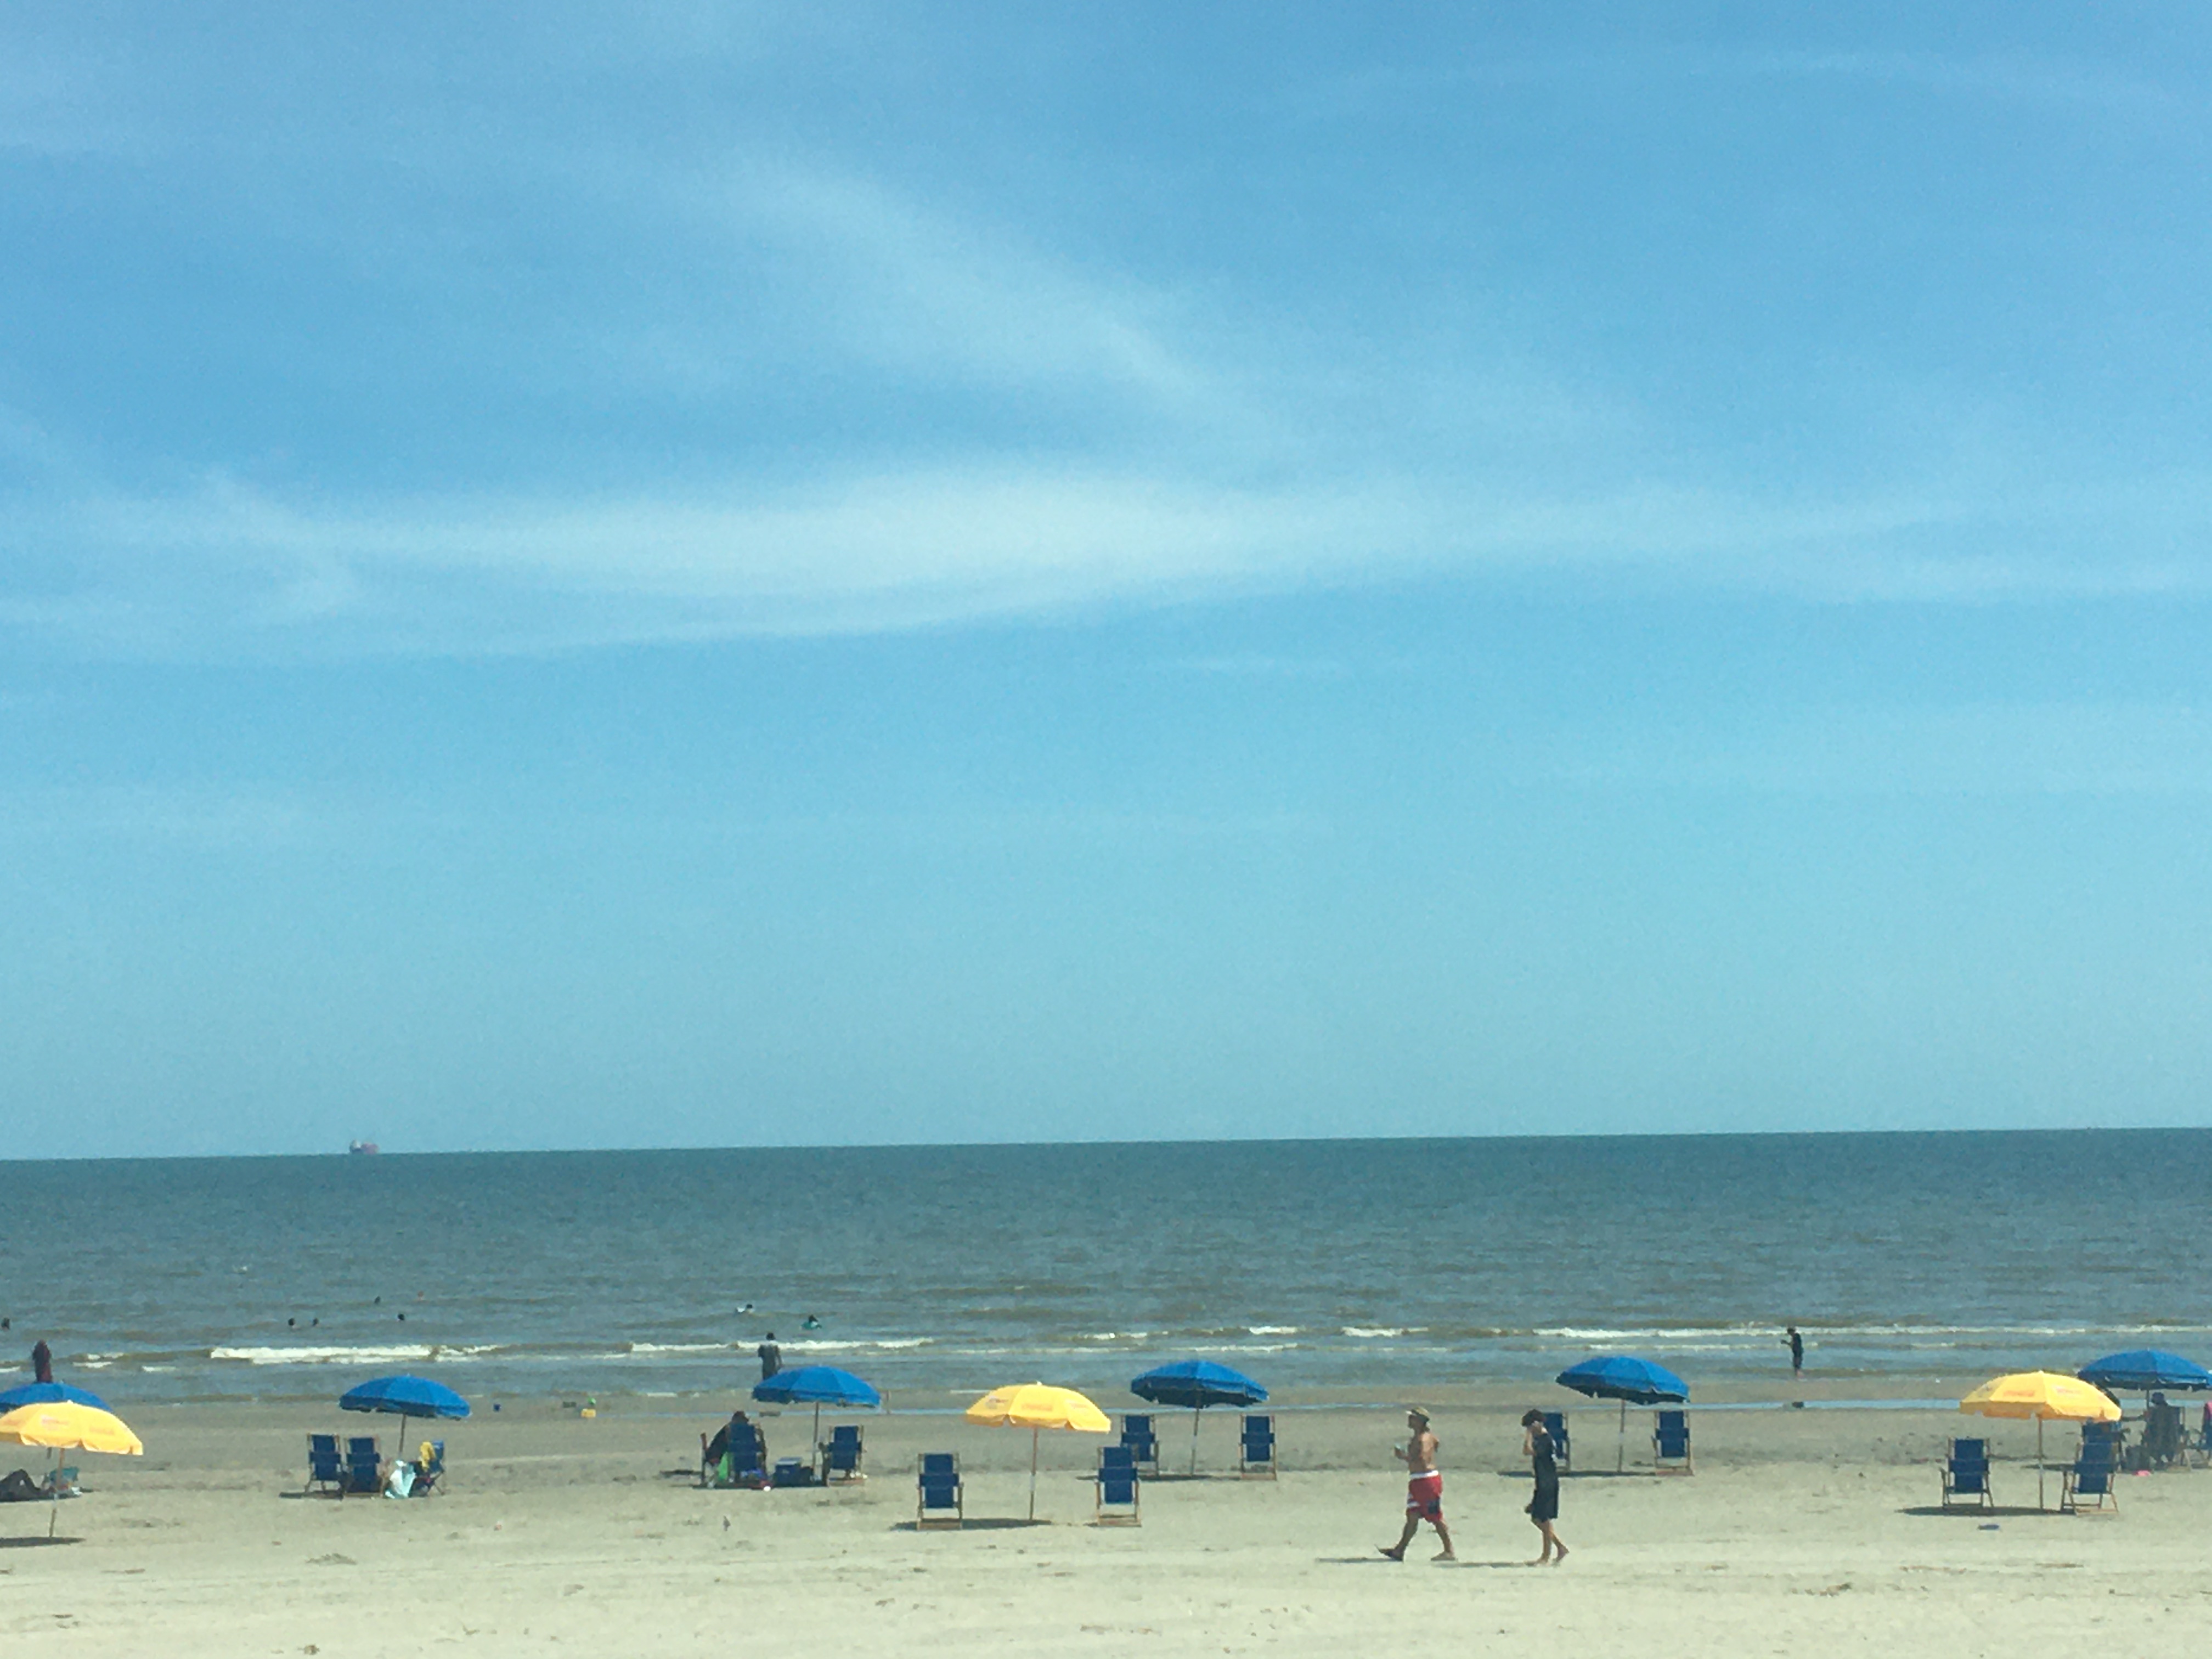 Socially distanced swimmers and sunbathers at Surfside Beach Texas